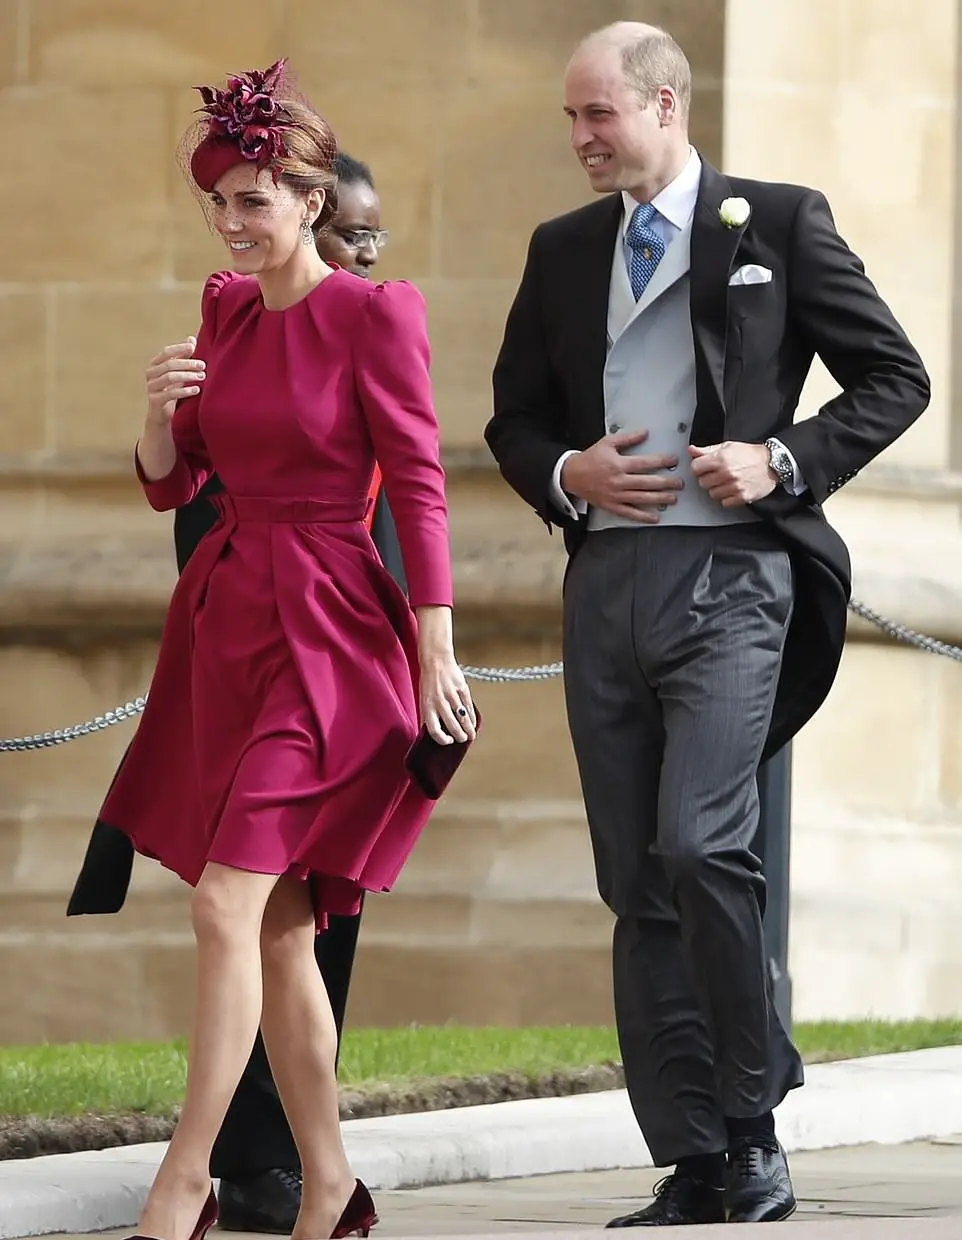 The Duke and Duchess of Cambridge arrived at the wedding of Princess Eugenie